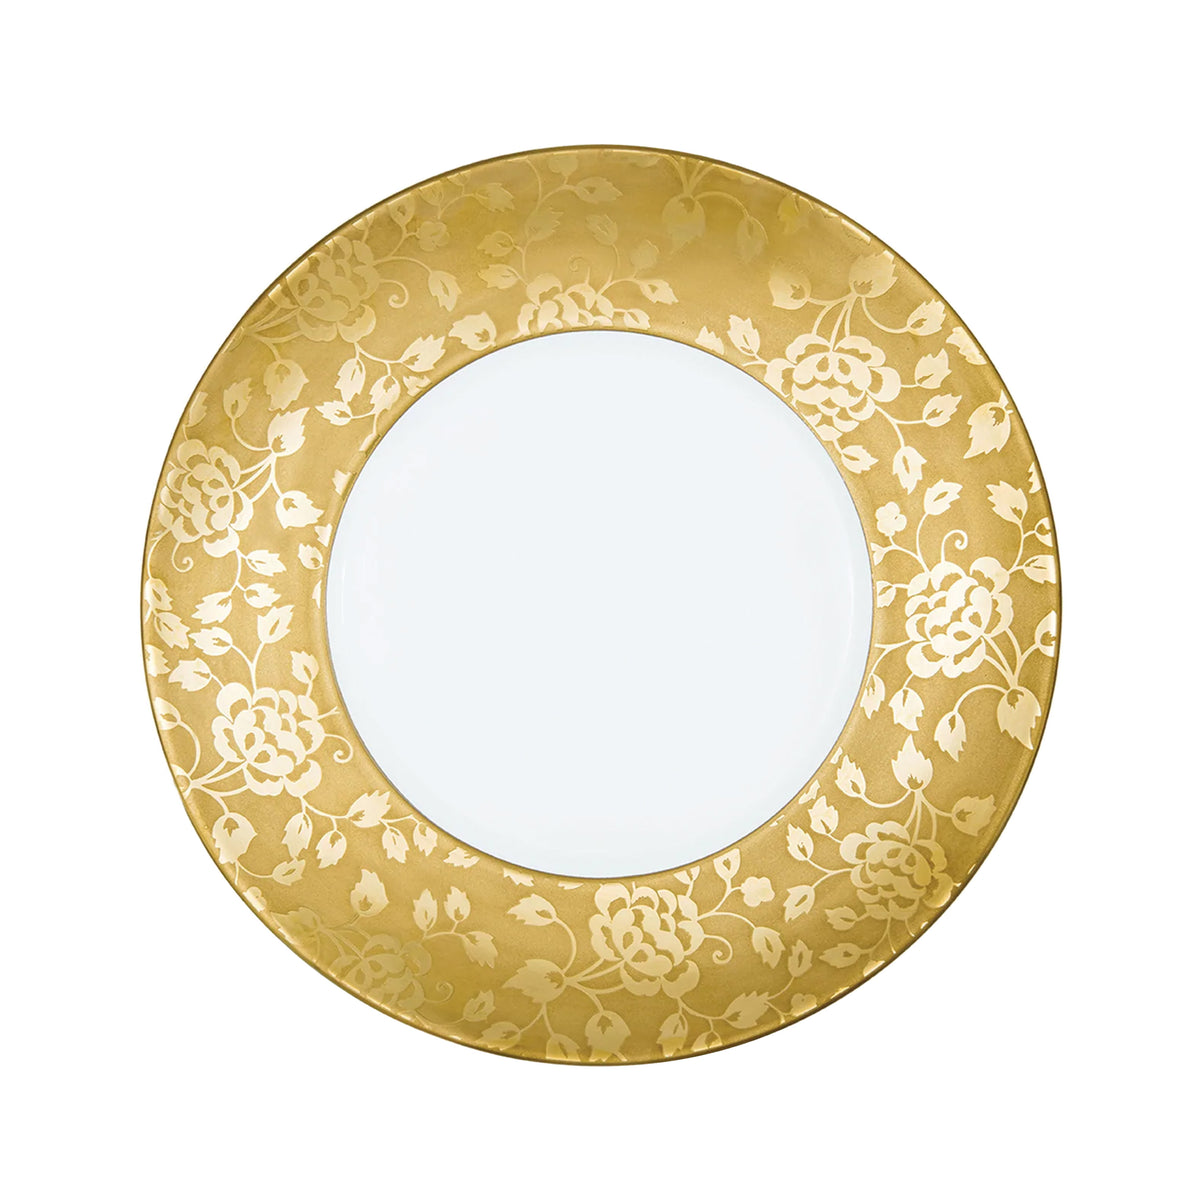 Gold inlaid thistles - Dinner plate